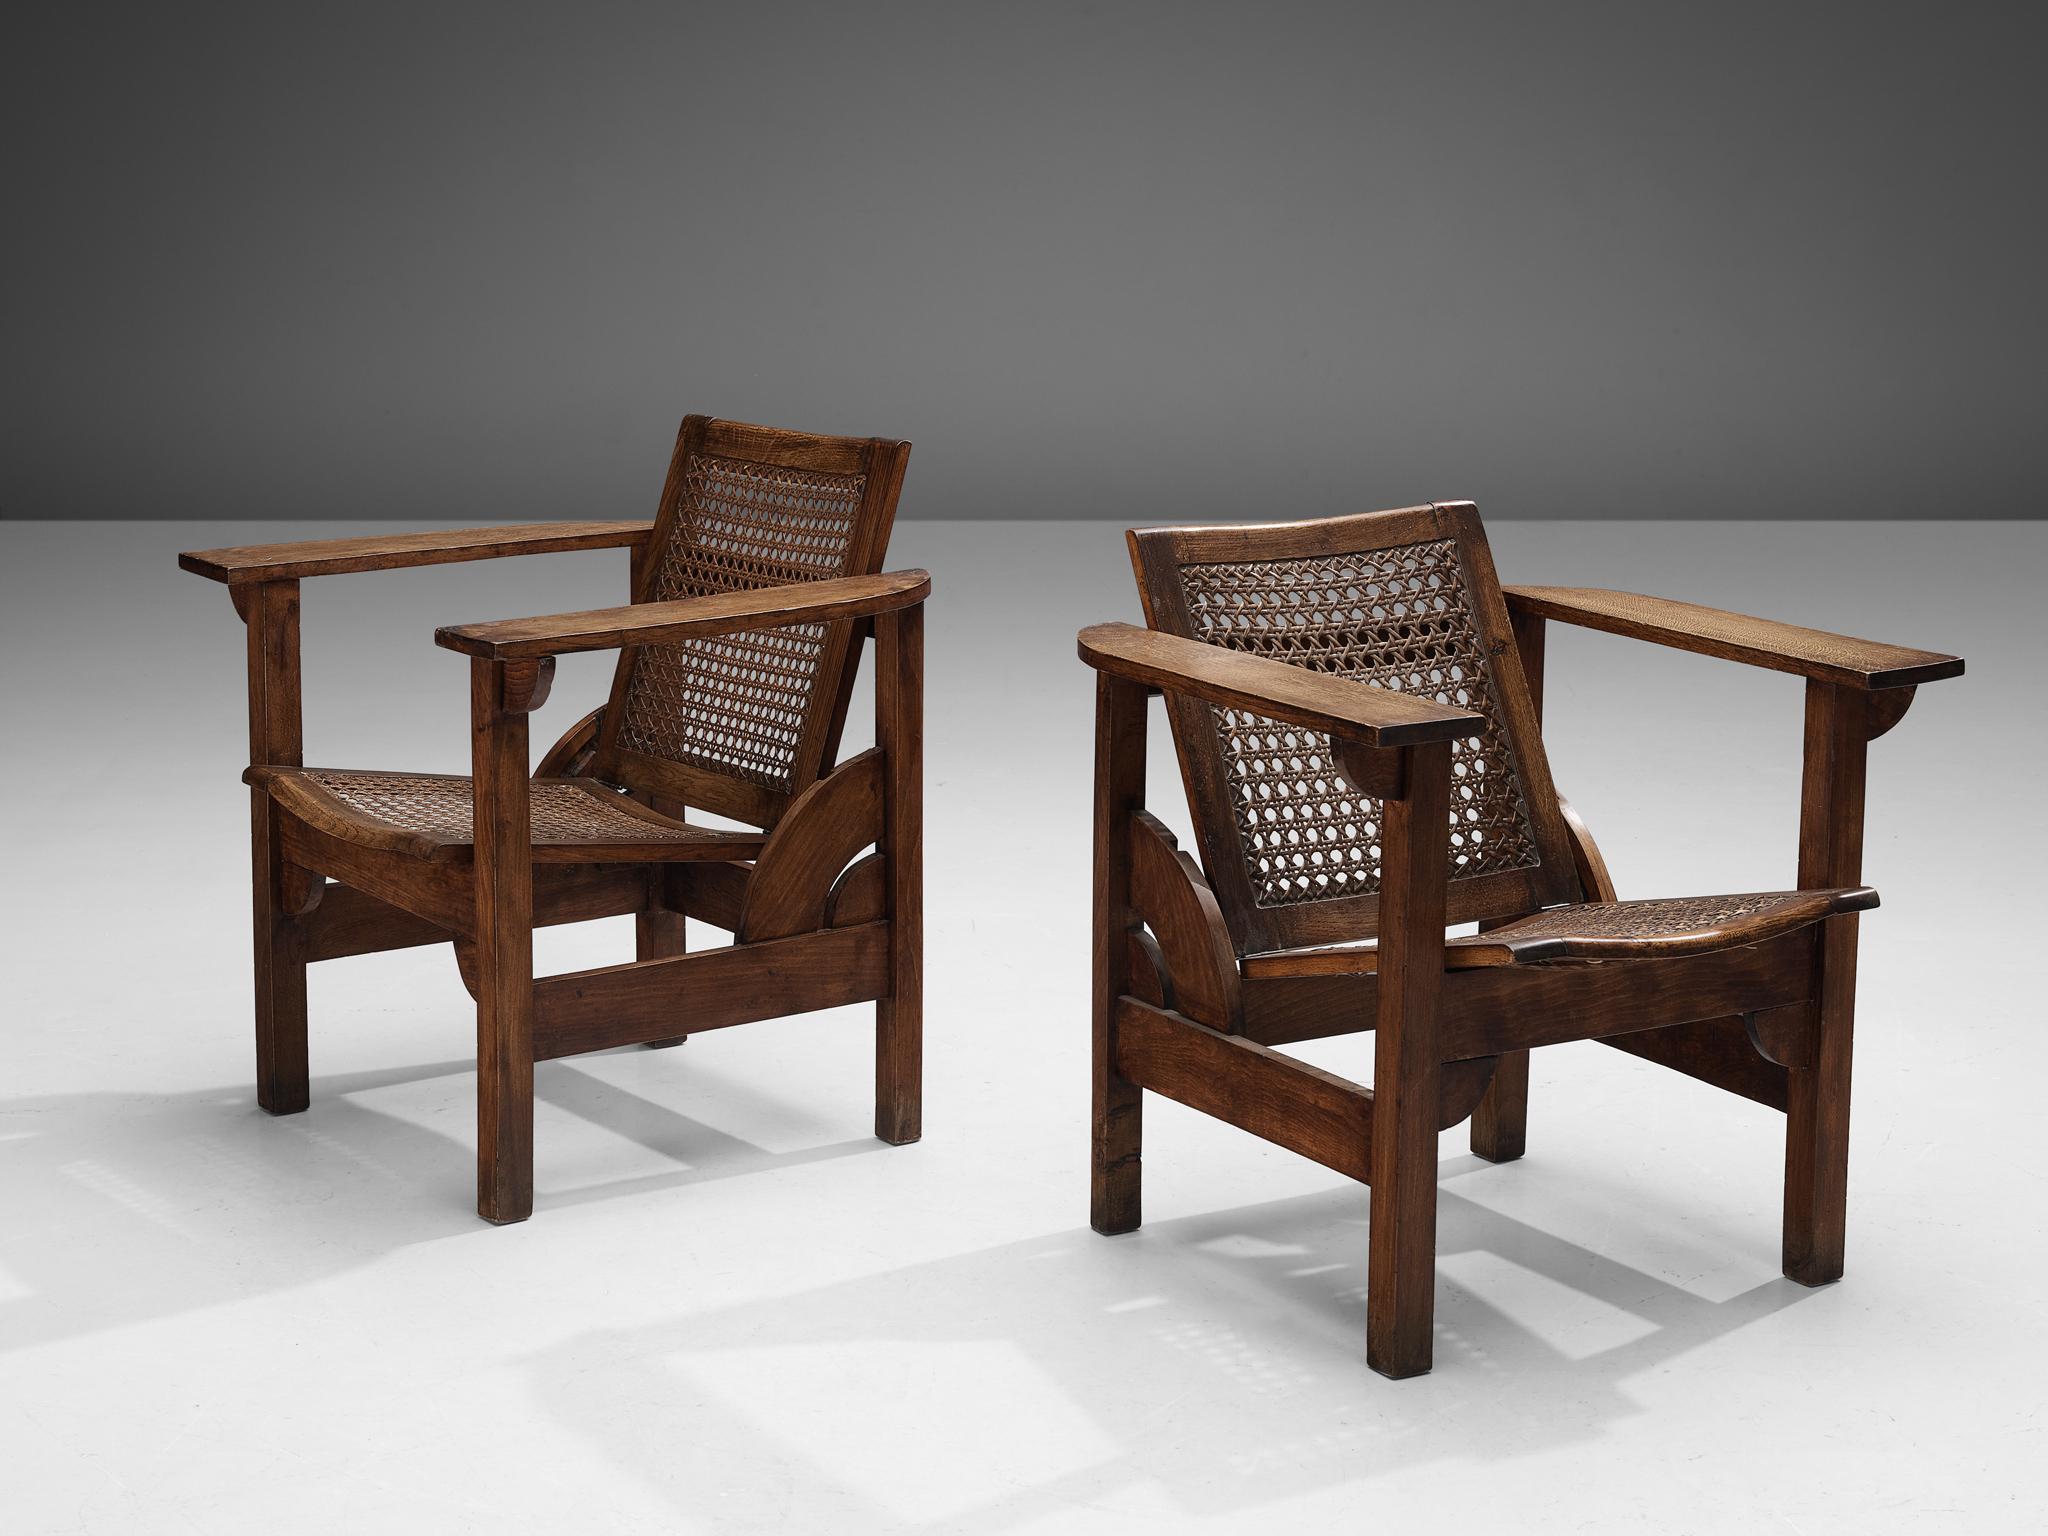 Pierre Dariel, pair of Hendaye armchairs, oak, beech, cane, France, 1930s.

Pair of Hendaye model armchairs designed by Pierre Dariel in the 1930s. The structure is composed entirely out of oak and beech, while the seat and backrest are made of